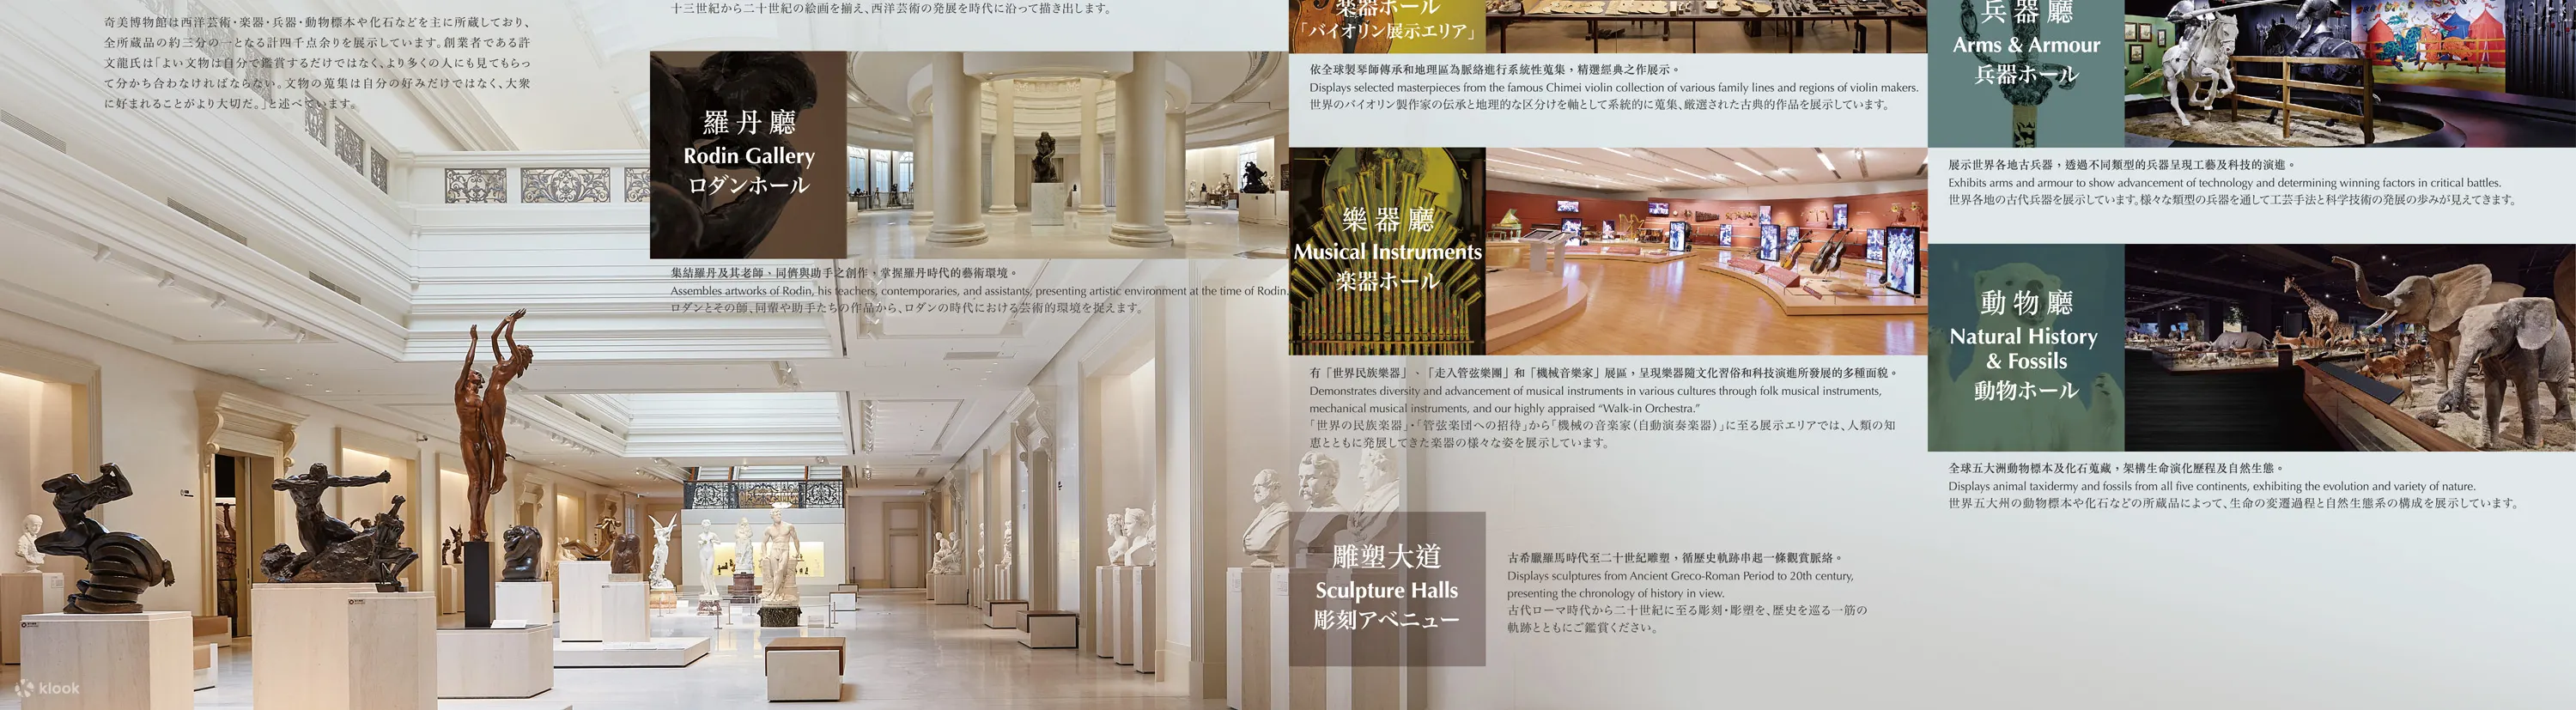 Chimei Museum Exhibition Ticket in Tainan - Klook Singapore